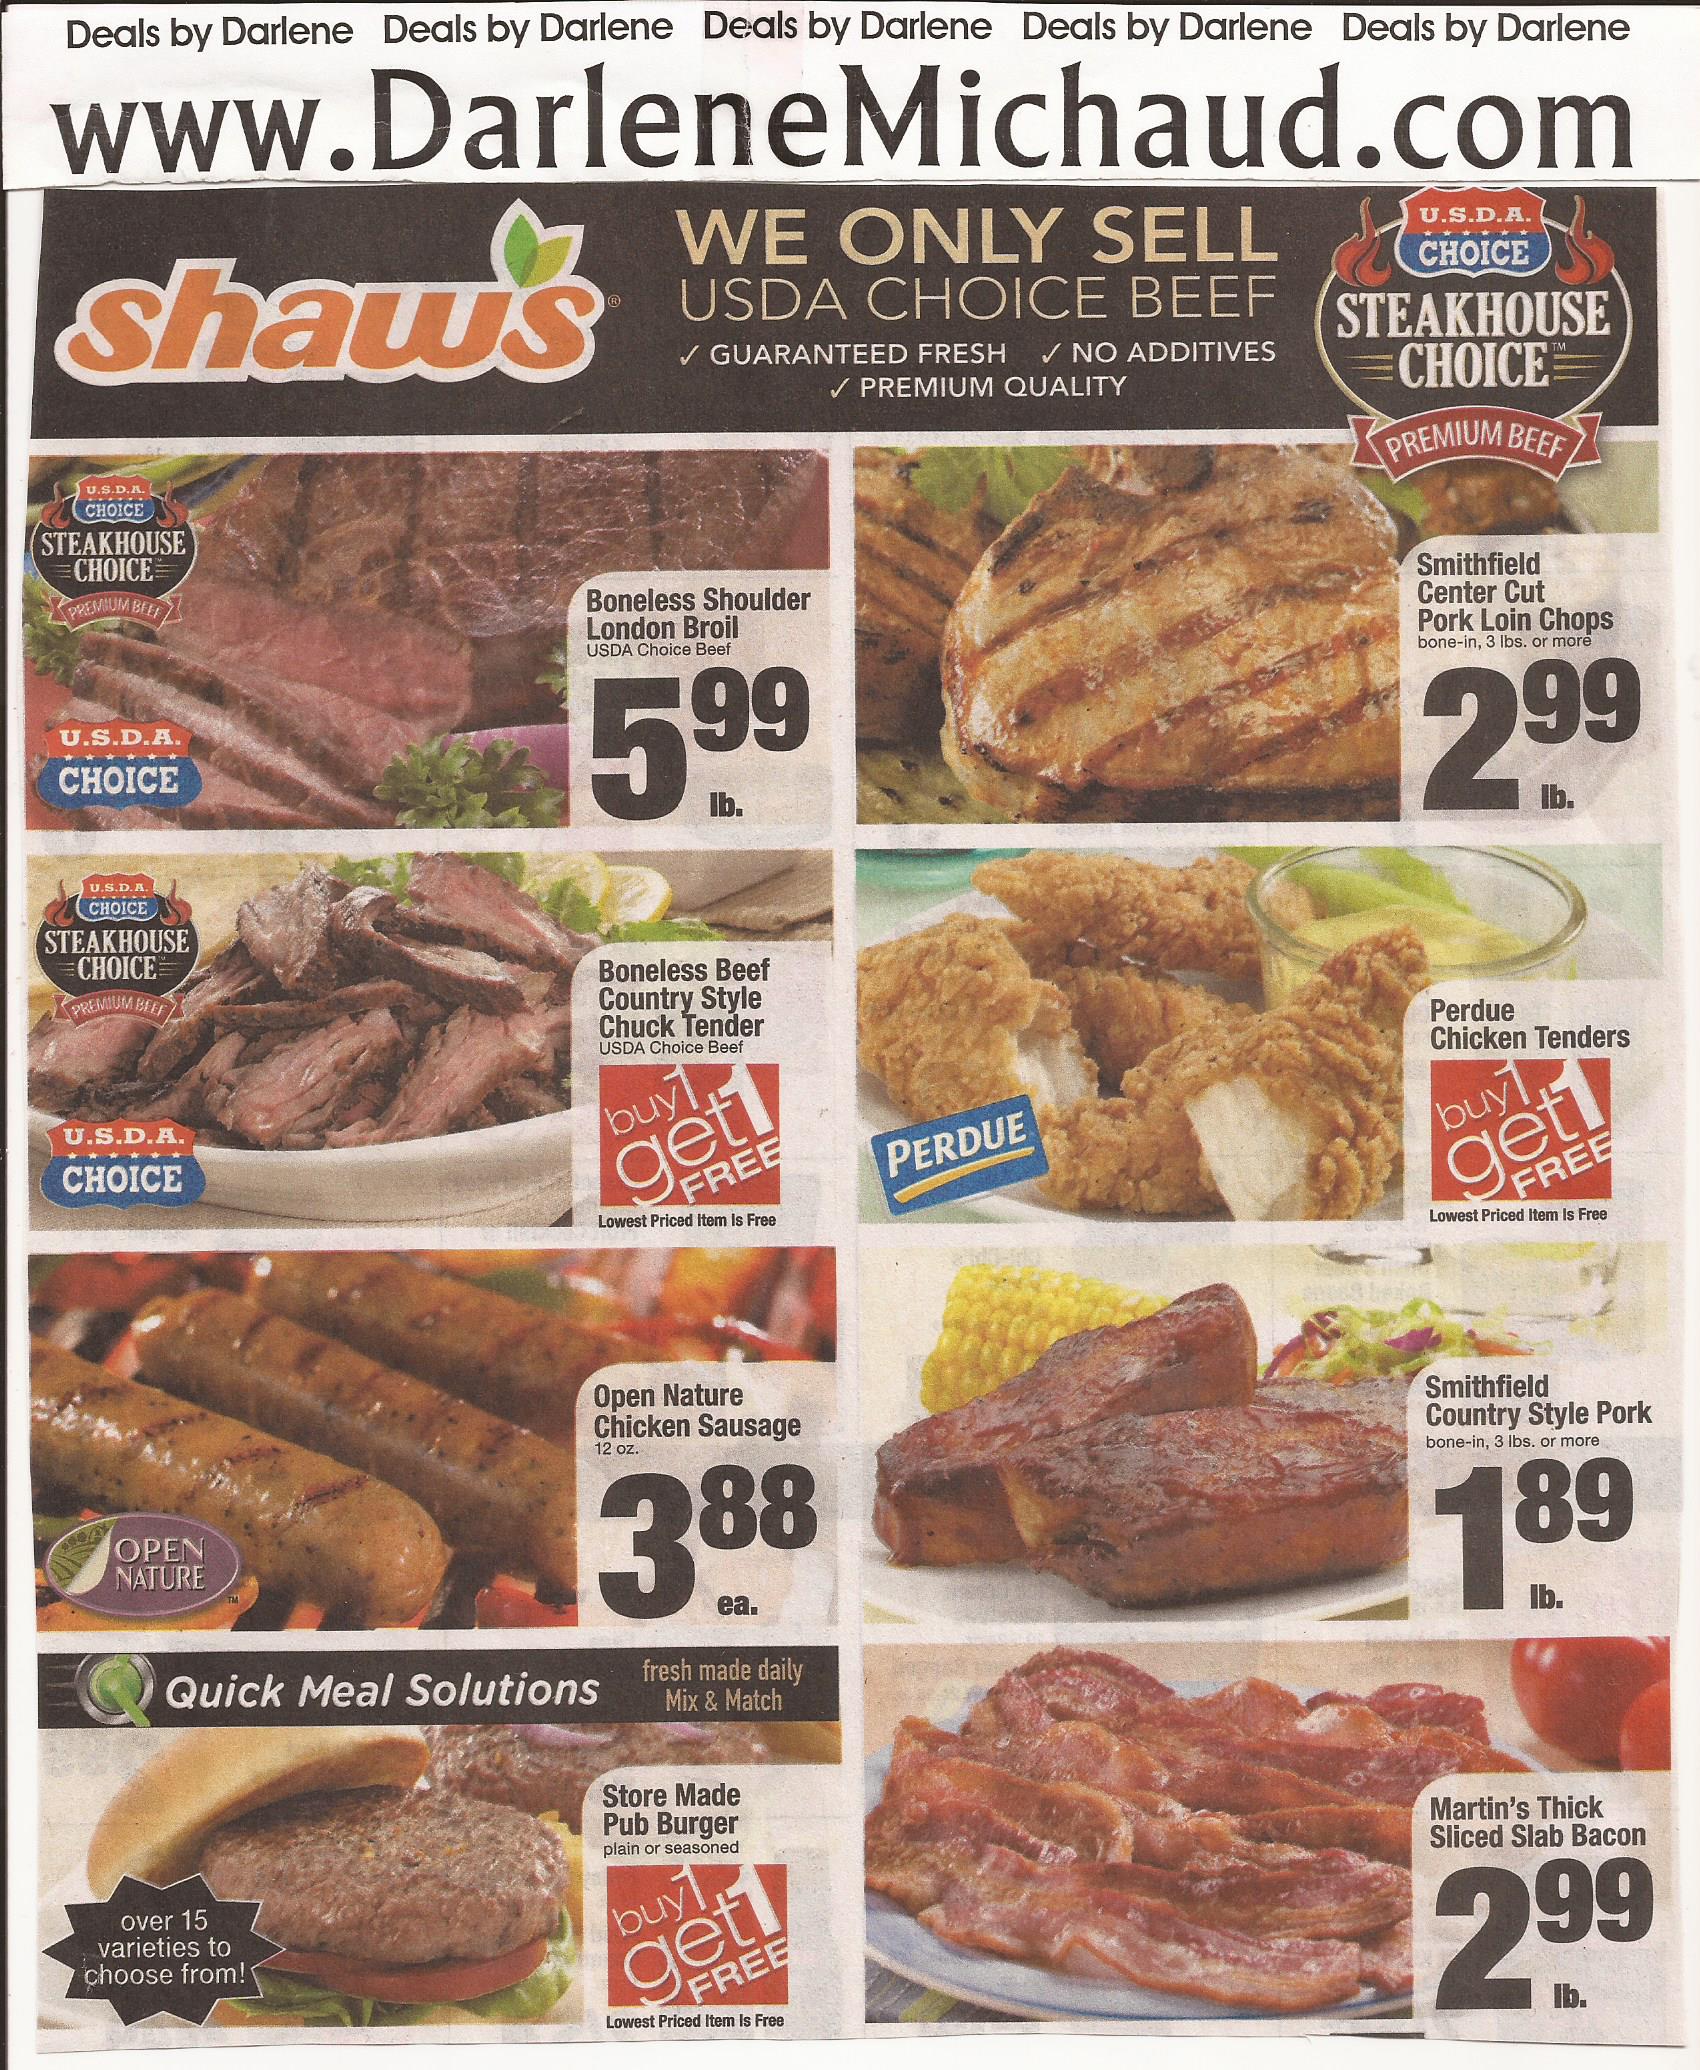 shaws-ad-scan-july-31-page-3a